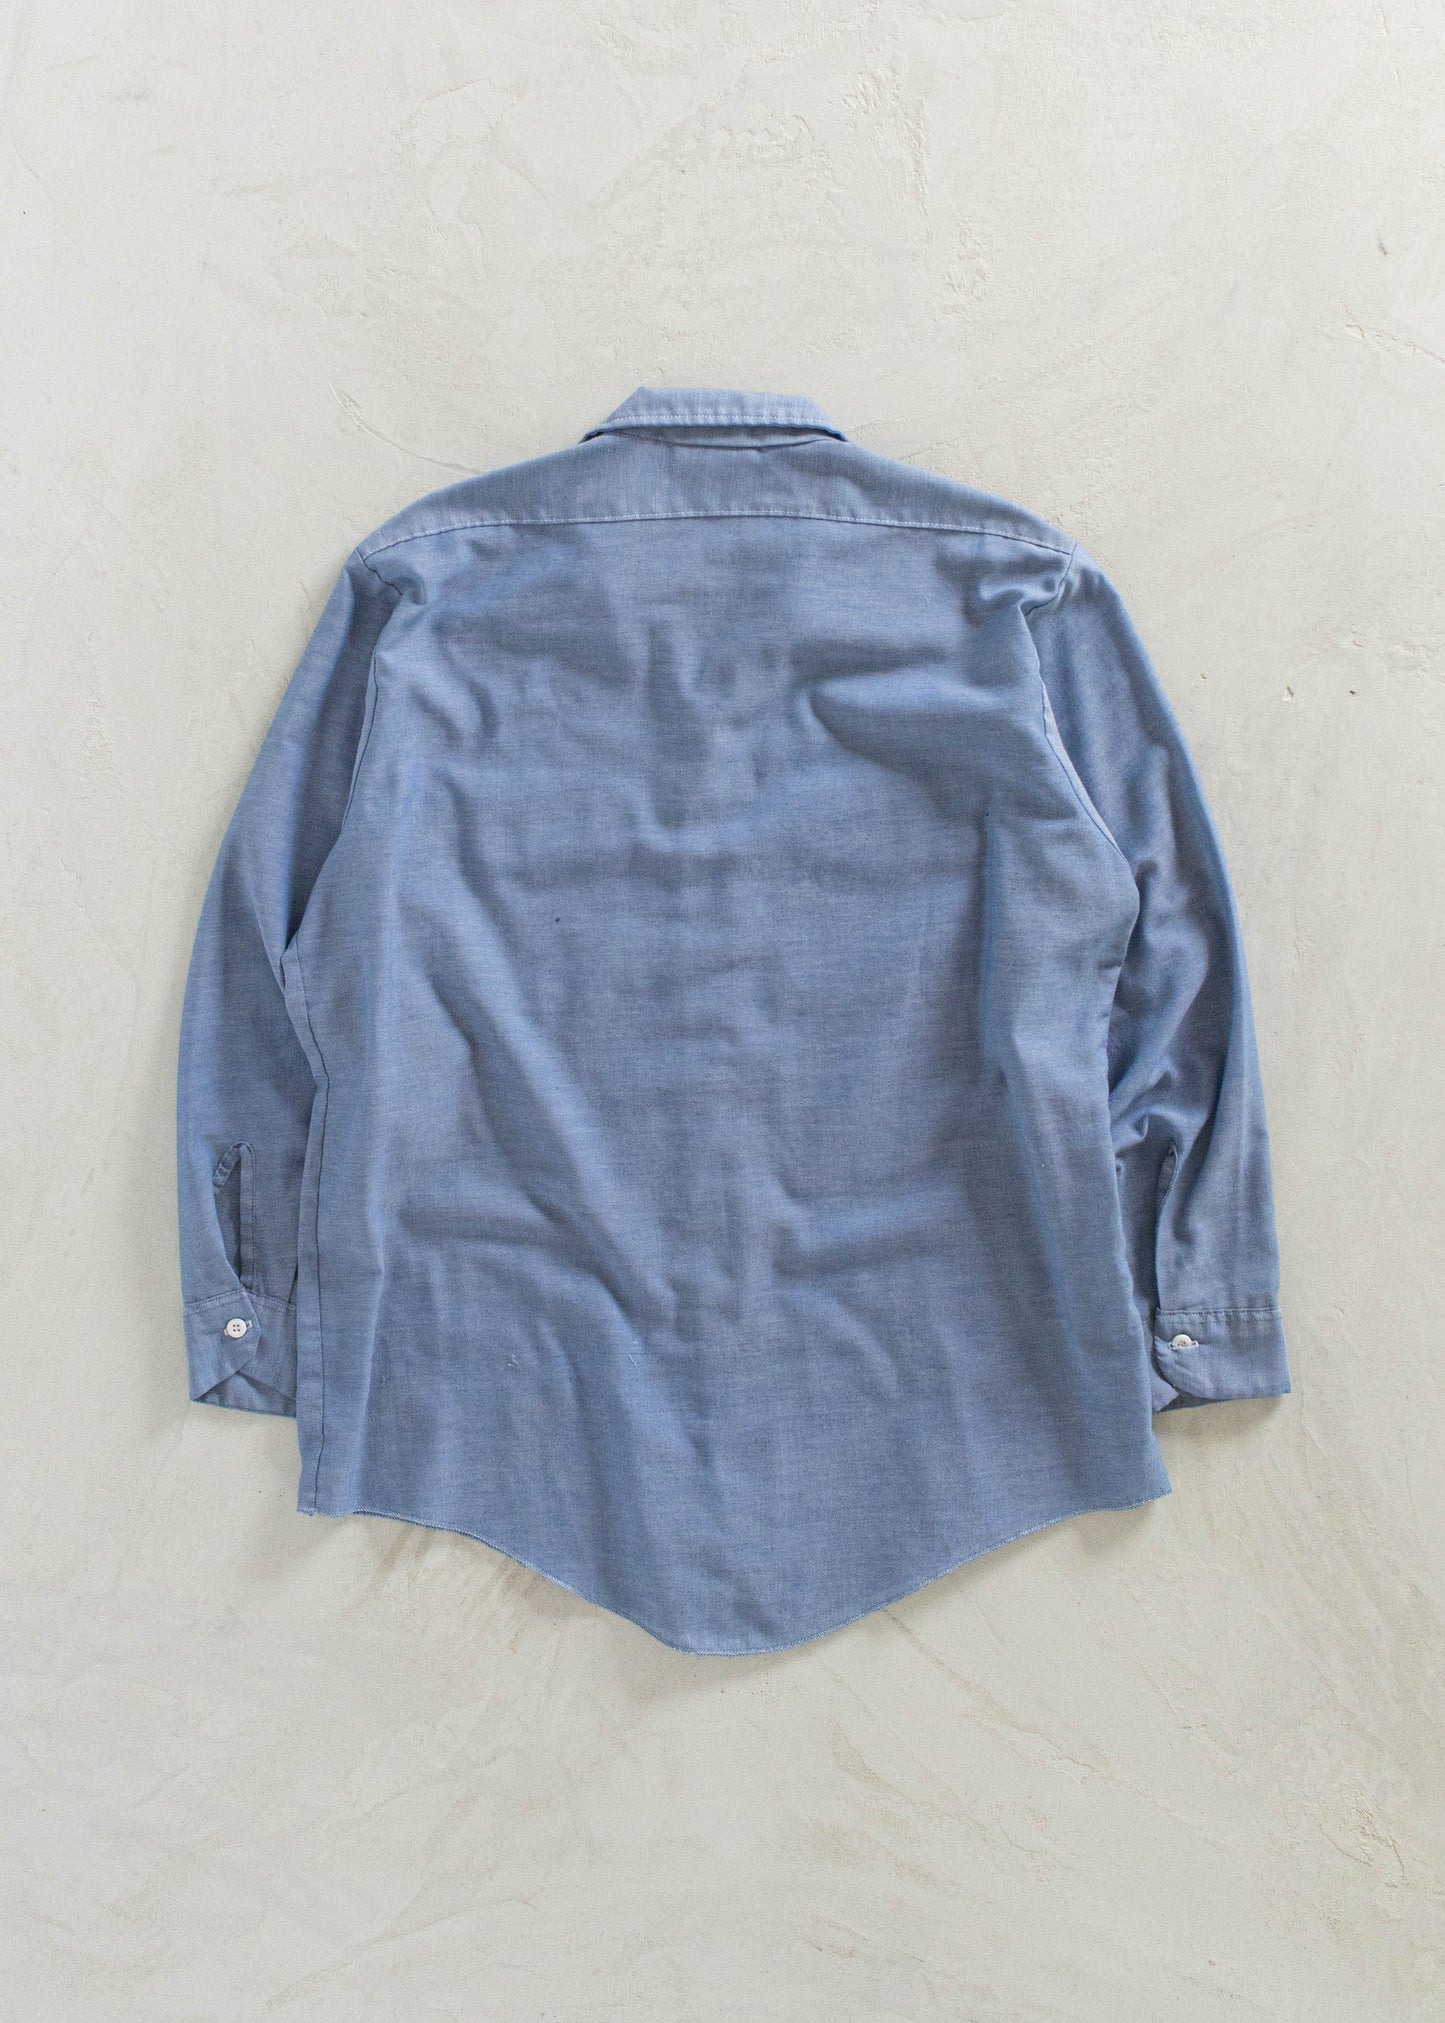 Dickies Chambray Button Up Shirt Size M/L